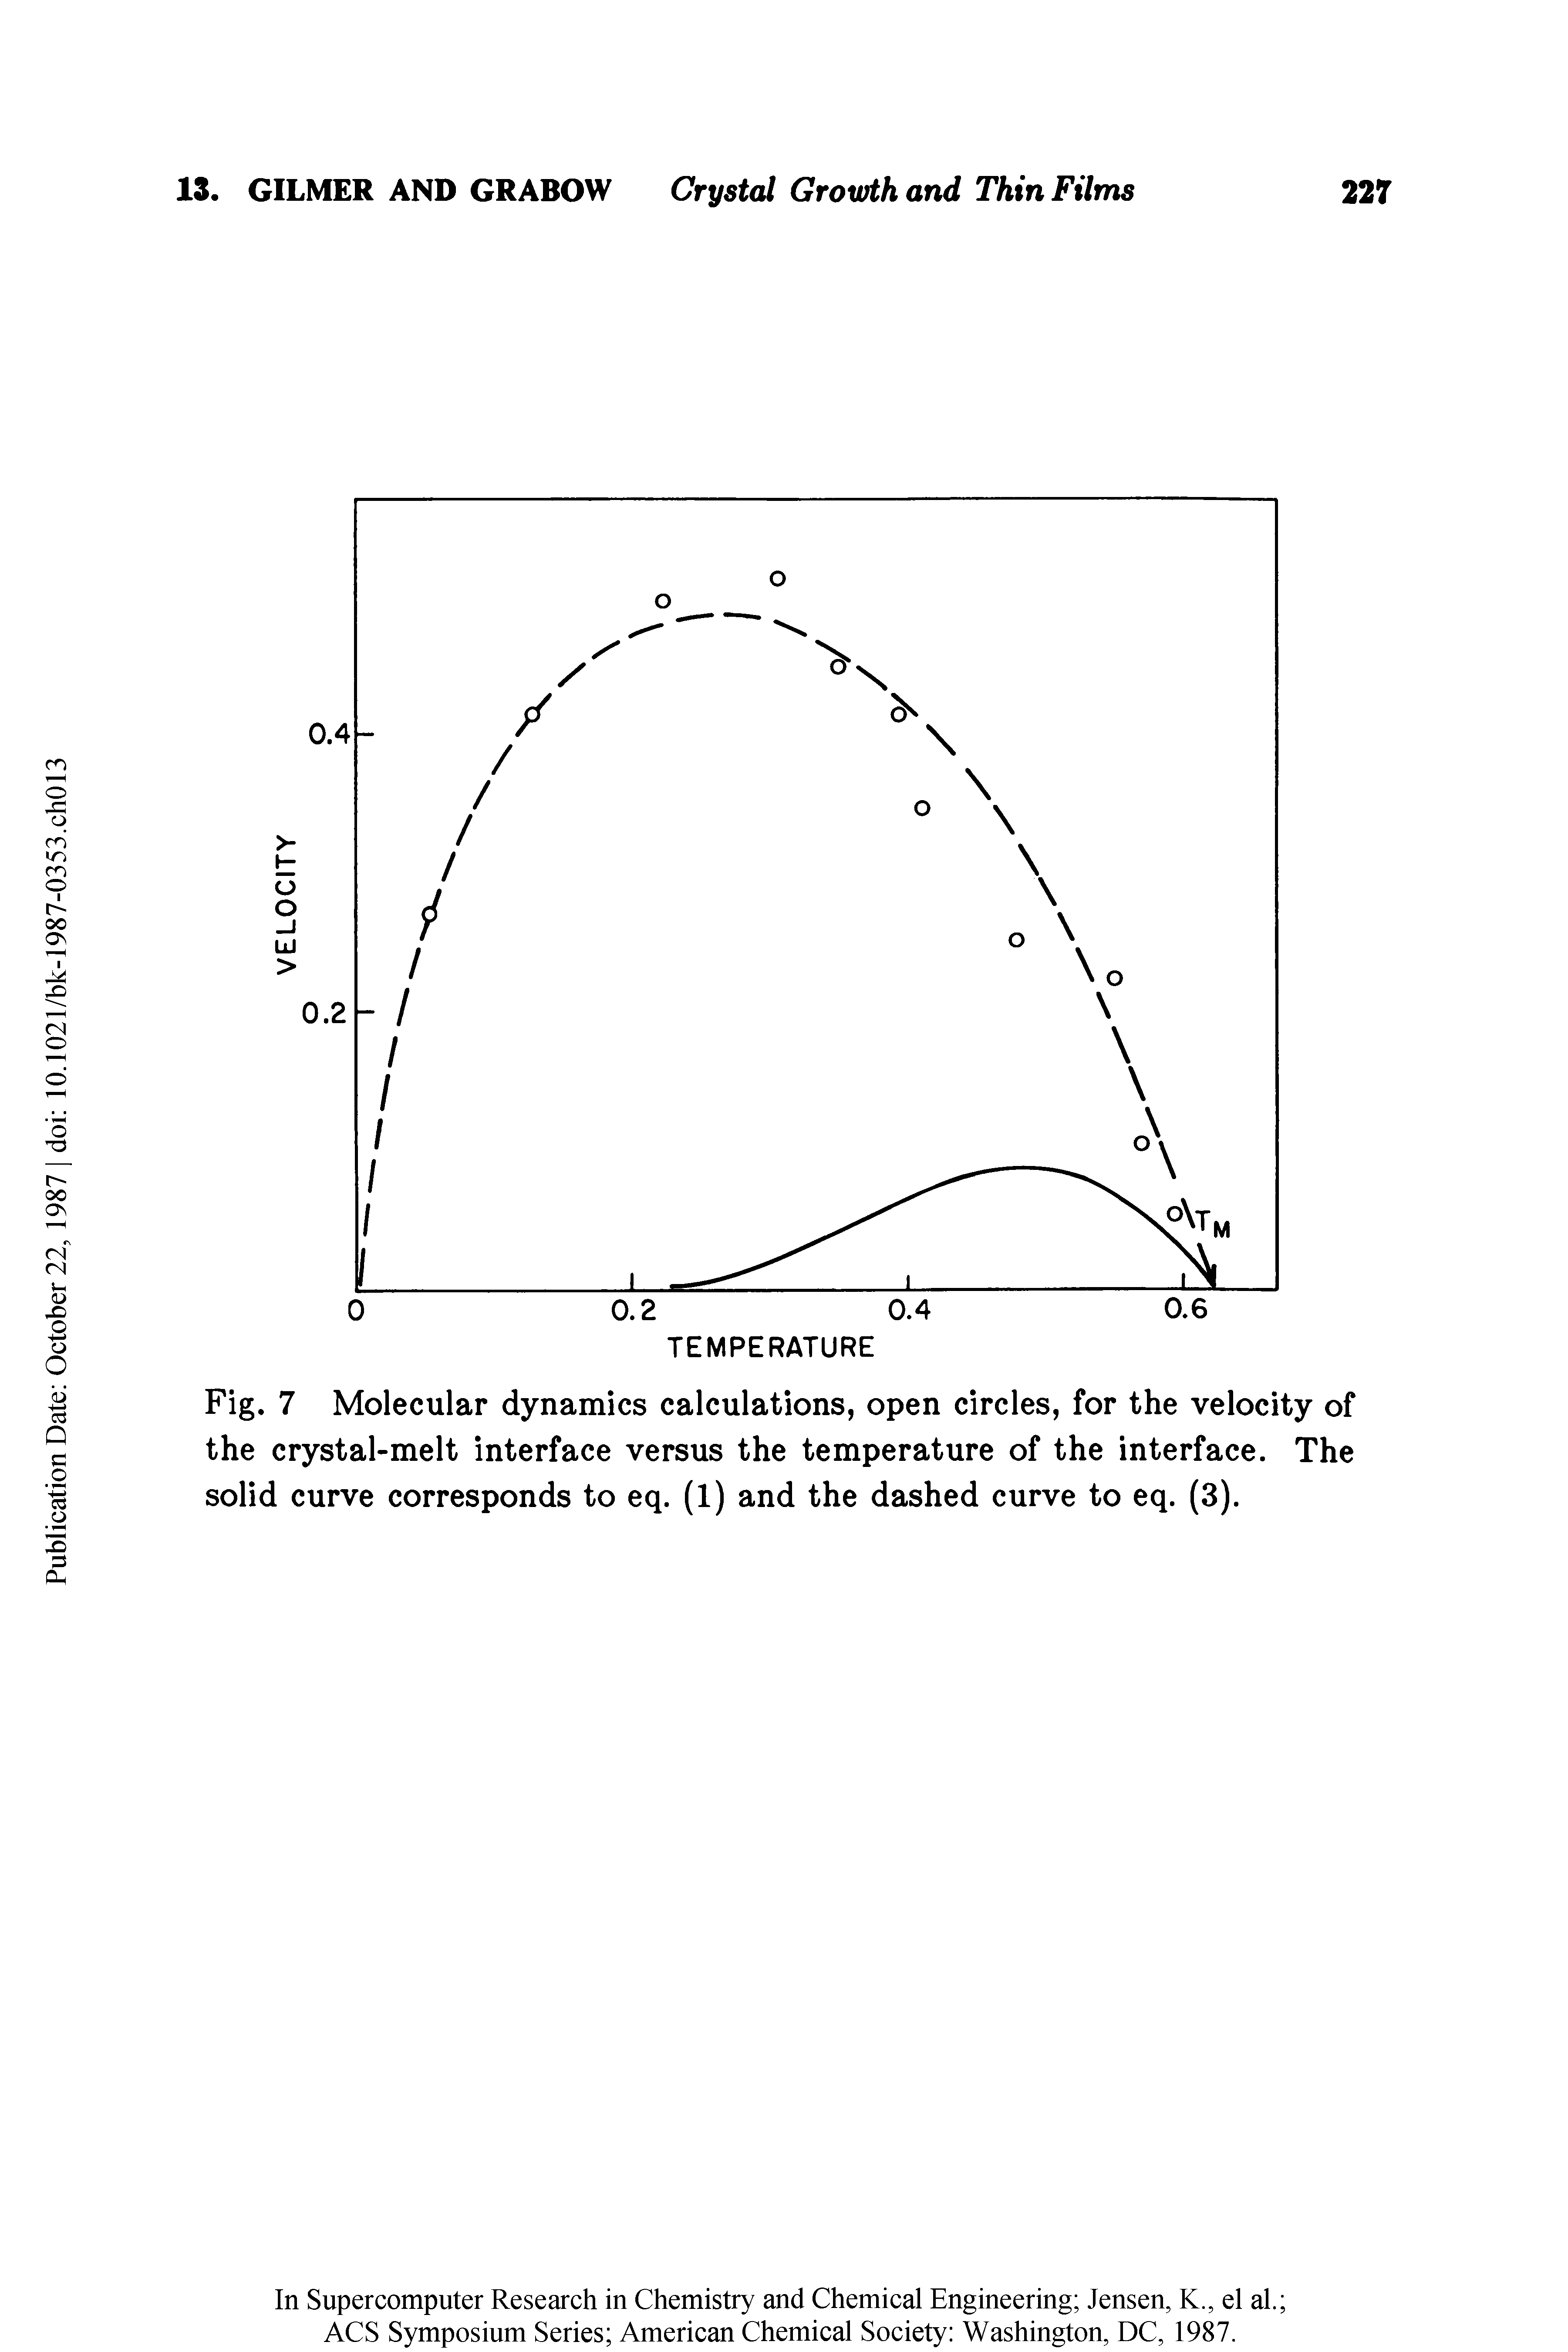 Fig. 7 Molecular dynamics calculations, open circles, for the velocity of the crystal-melt interface versus the temperature of the interface. The solid curve corresponds to eq. (1) and the dashed curve to eq. (3).